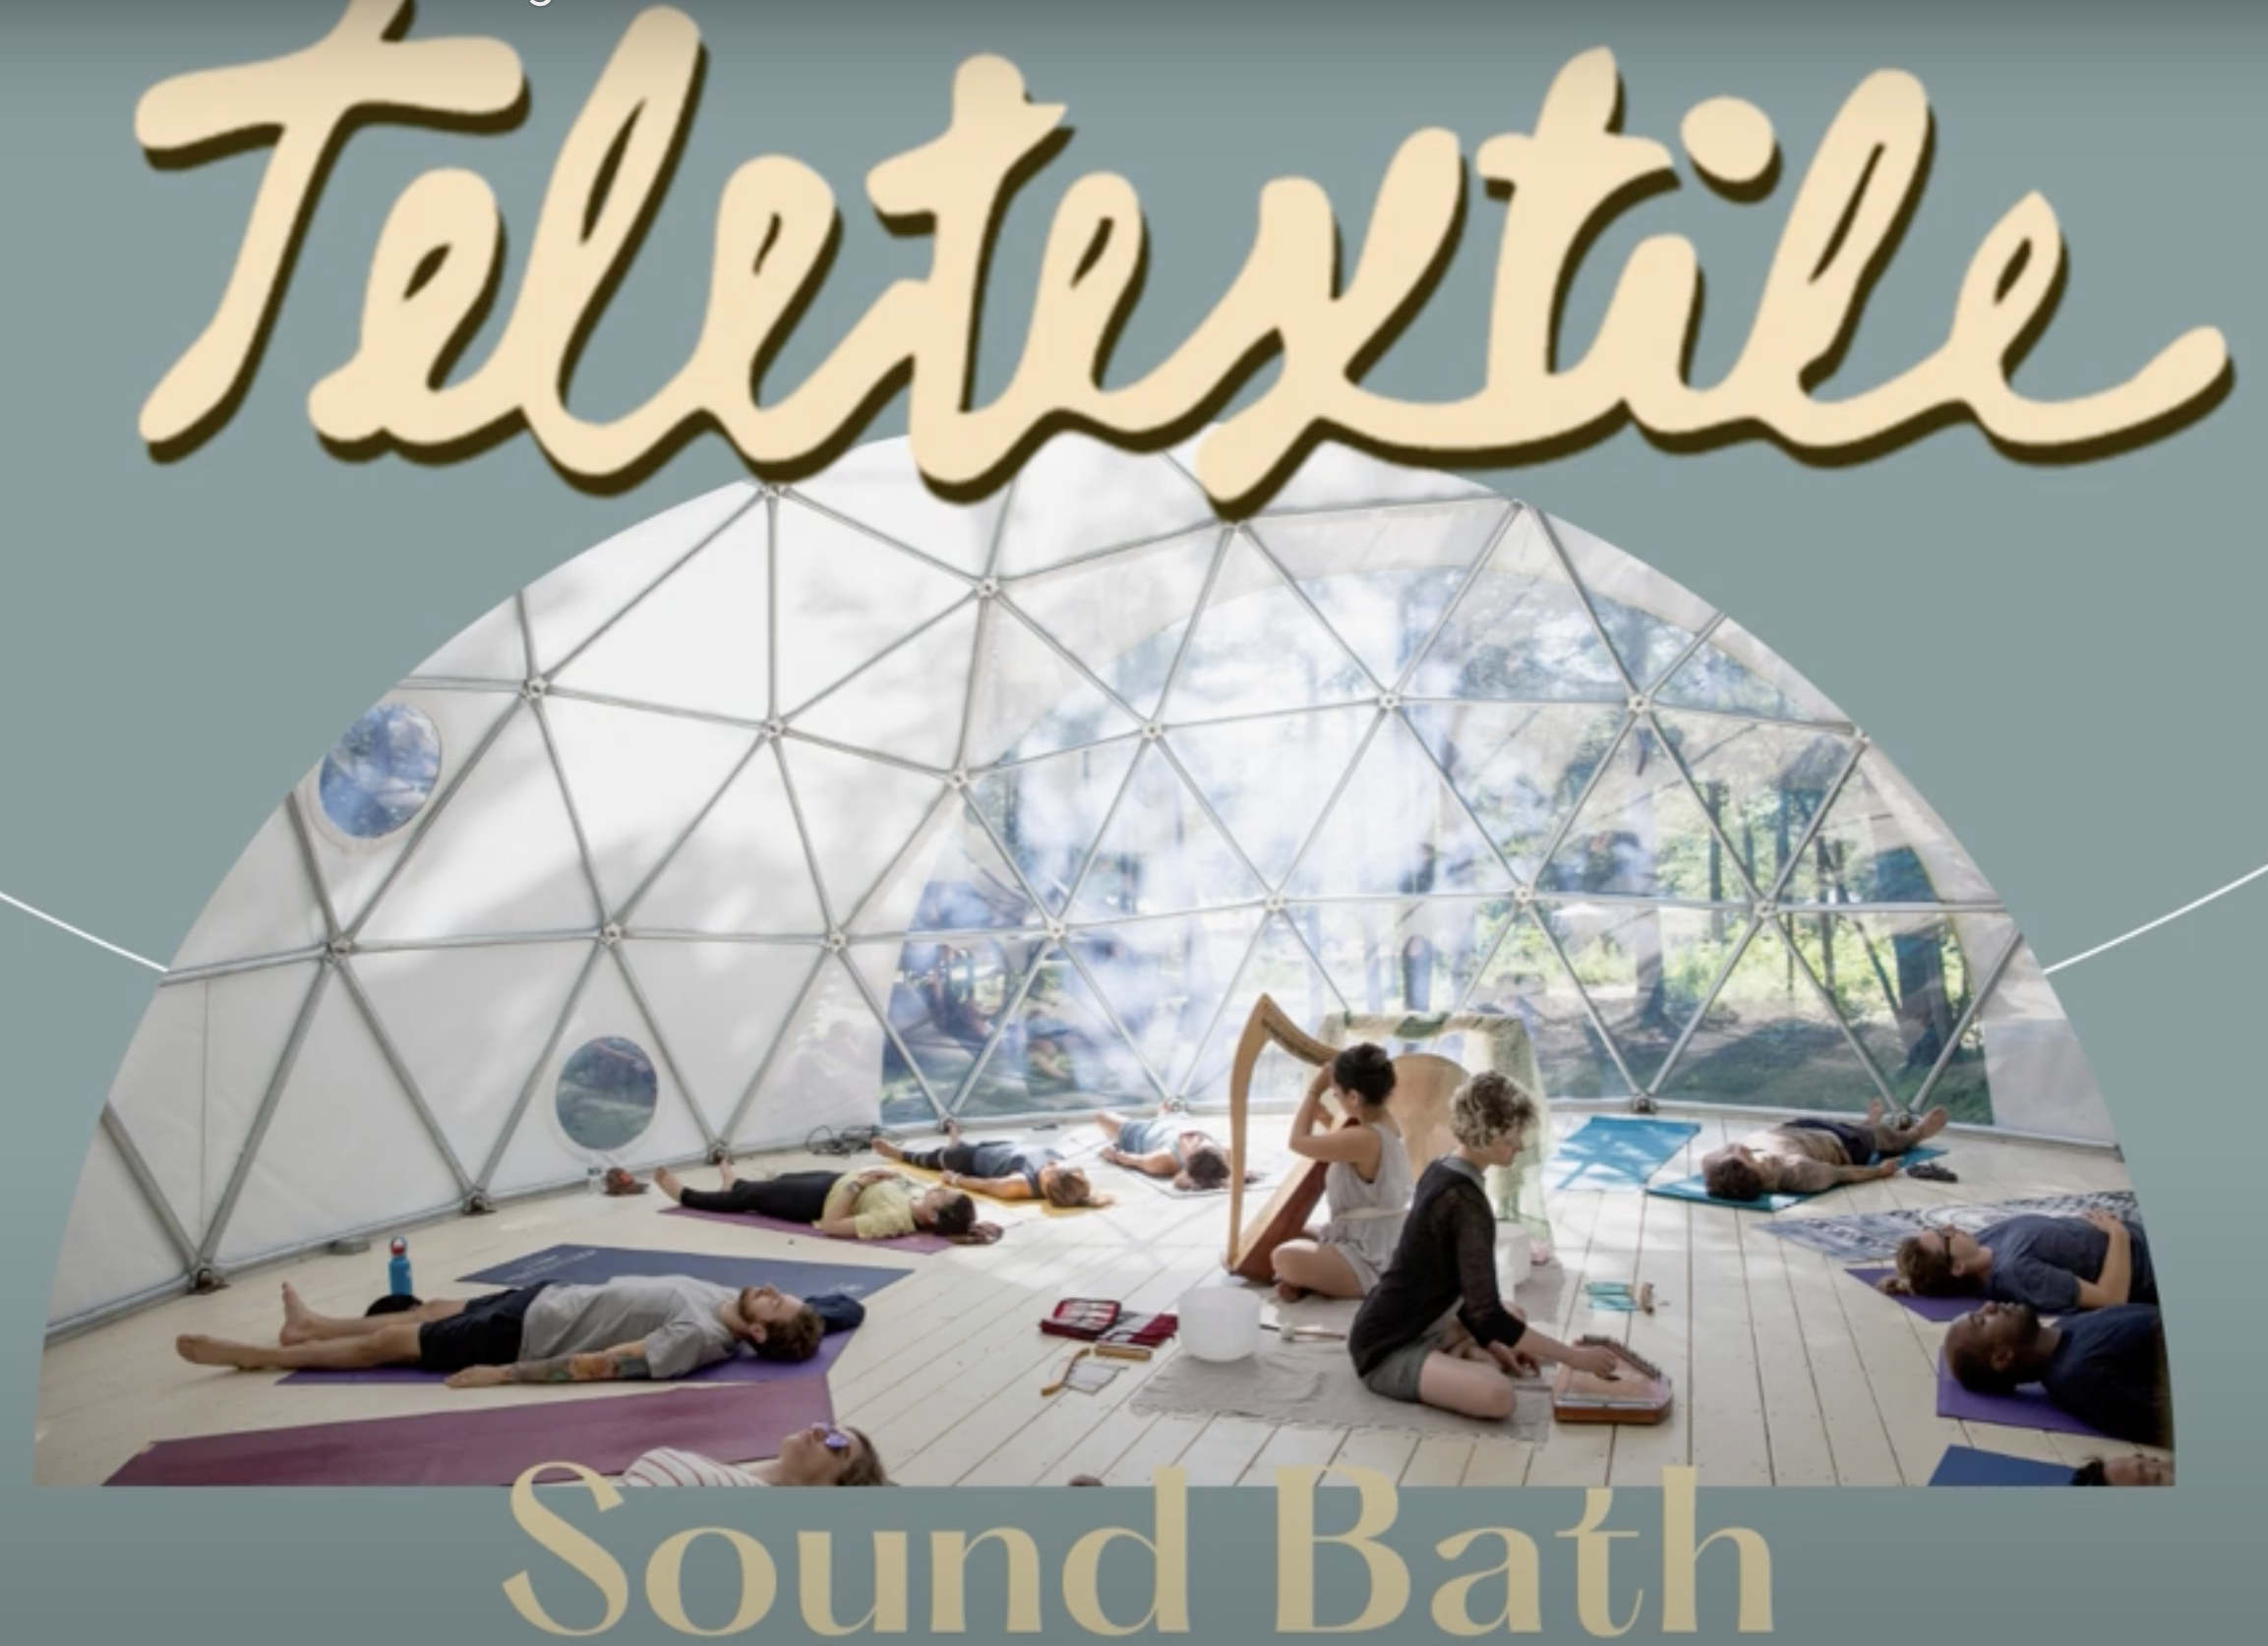 6 people laying on the floor on yoga mats in a circular formation under a clear geodesic dome structure with a harpist and another music sitting in the middle.